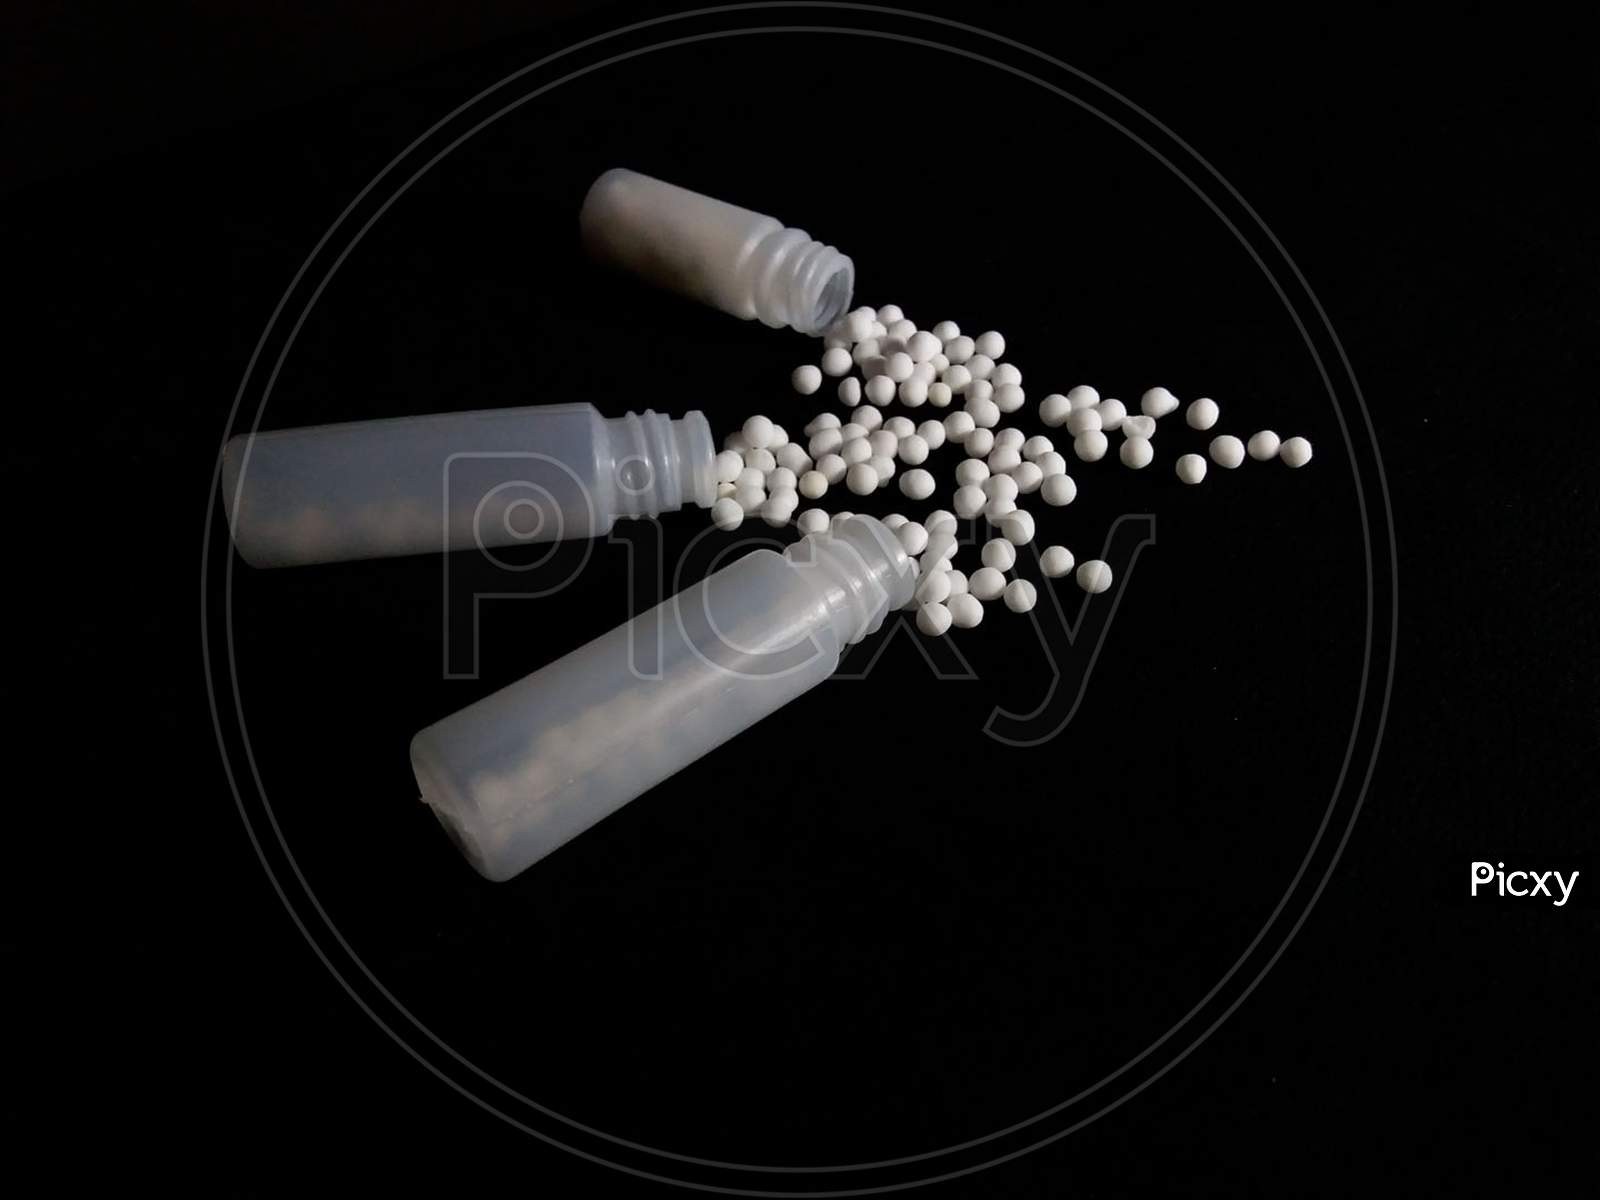 Globules/pills of homeopathy medicine scattered on black background